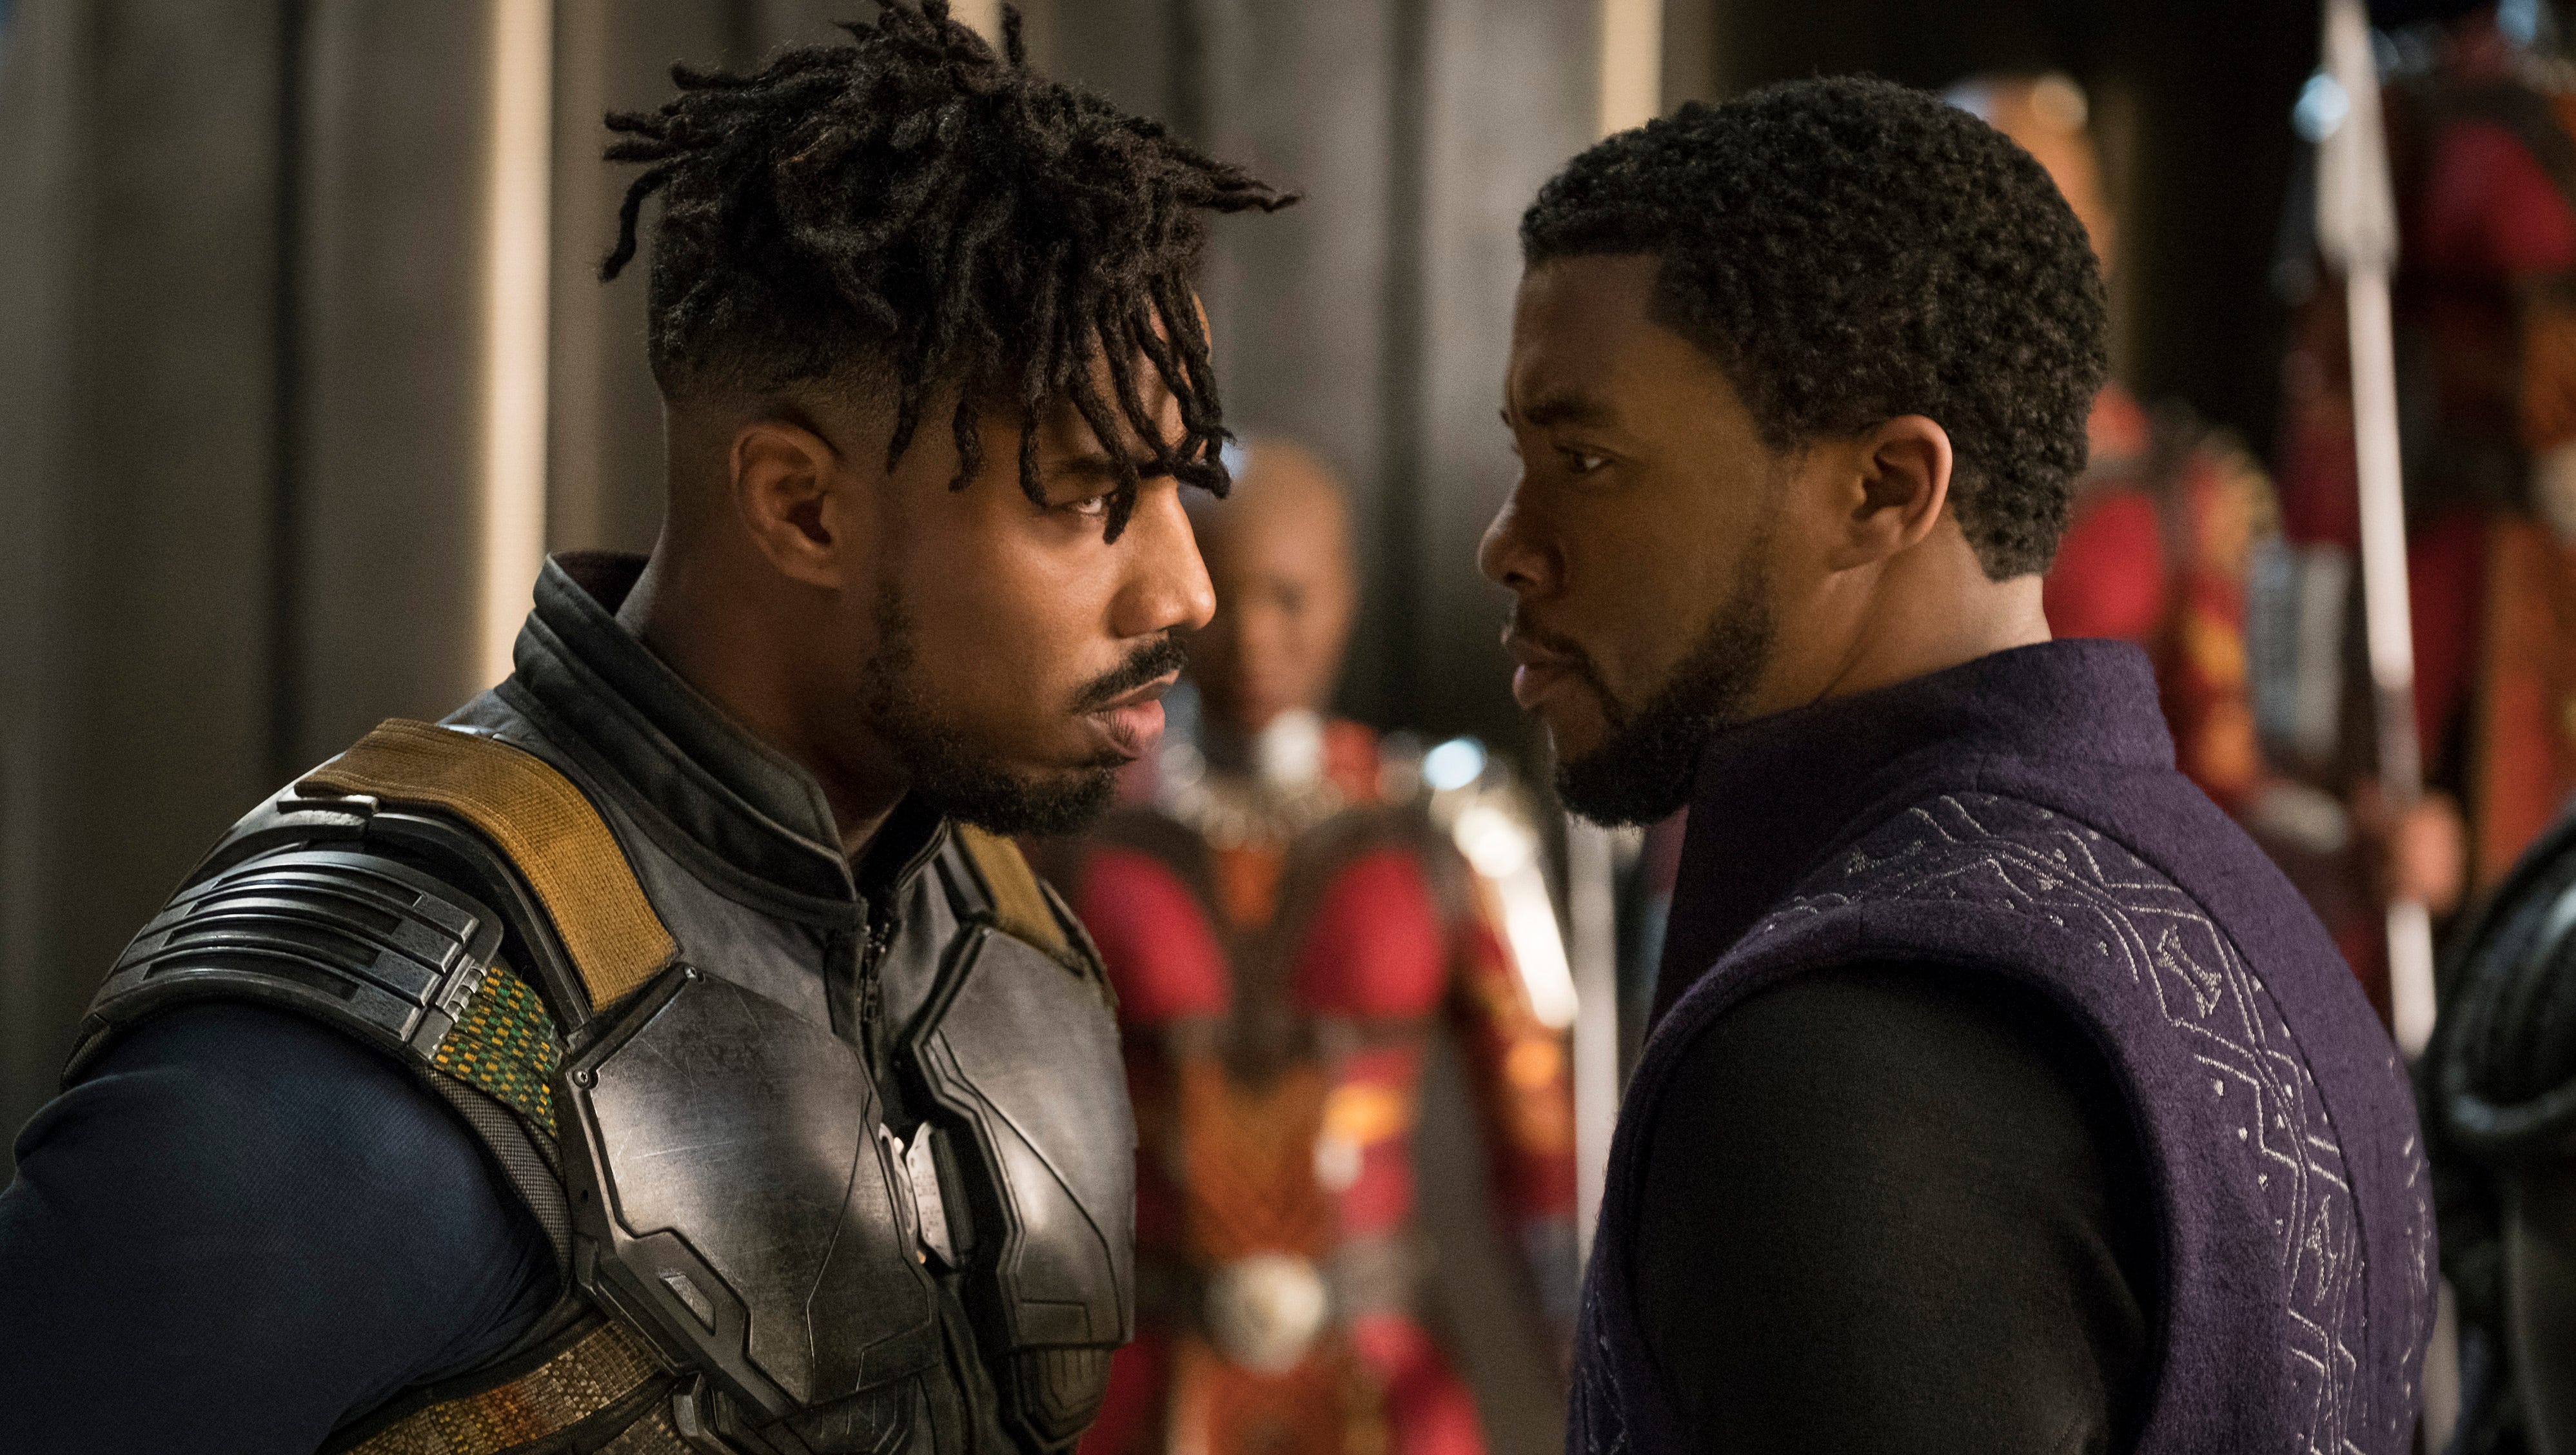 Black Panther' roars to a record $192M opening at the box office